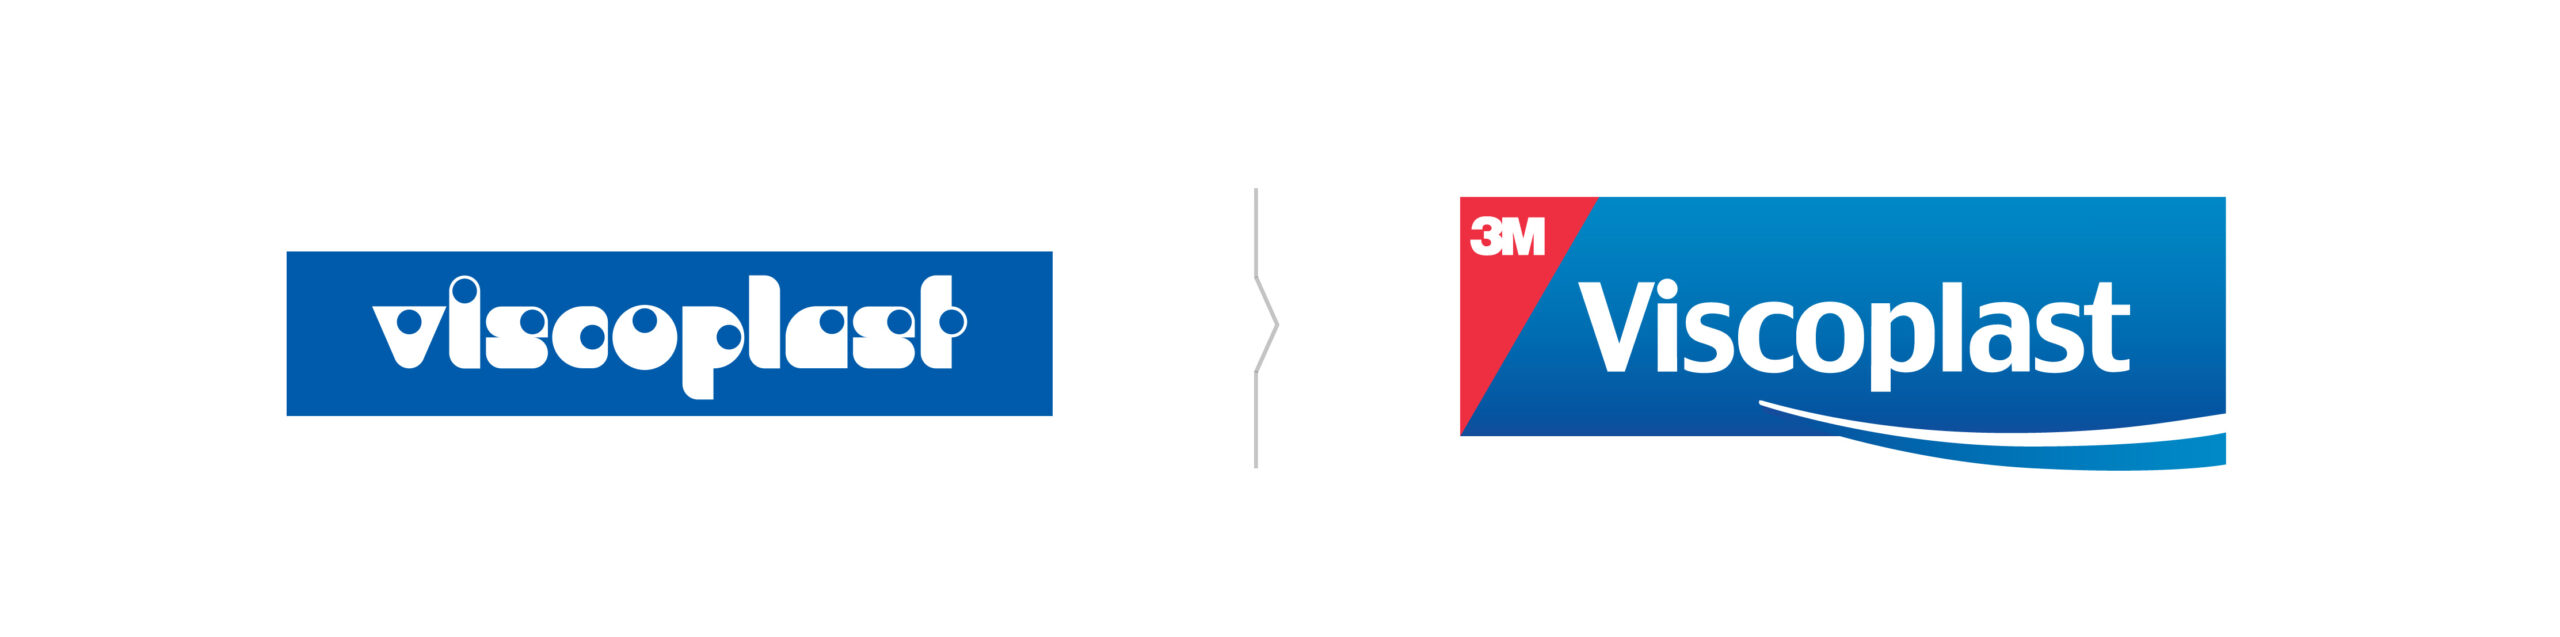 Rebranding of the Viscoplast brand - old logo and new logo designed by PND Futura